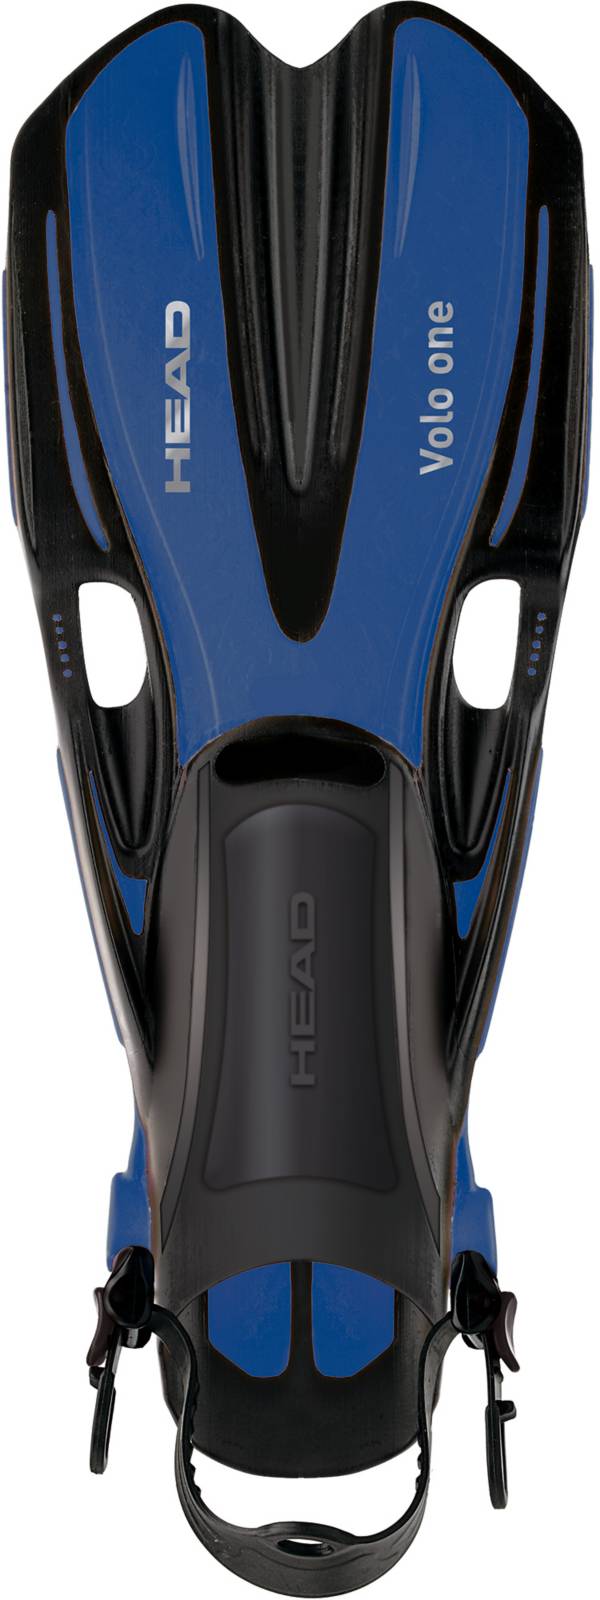 Head Volo One Snorkeling Fins product image